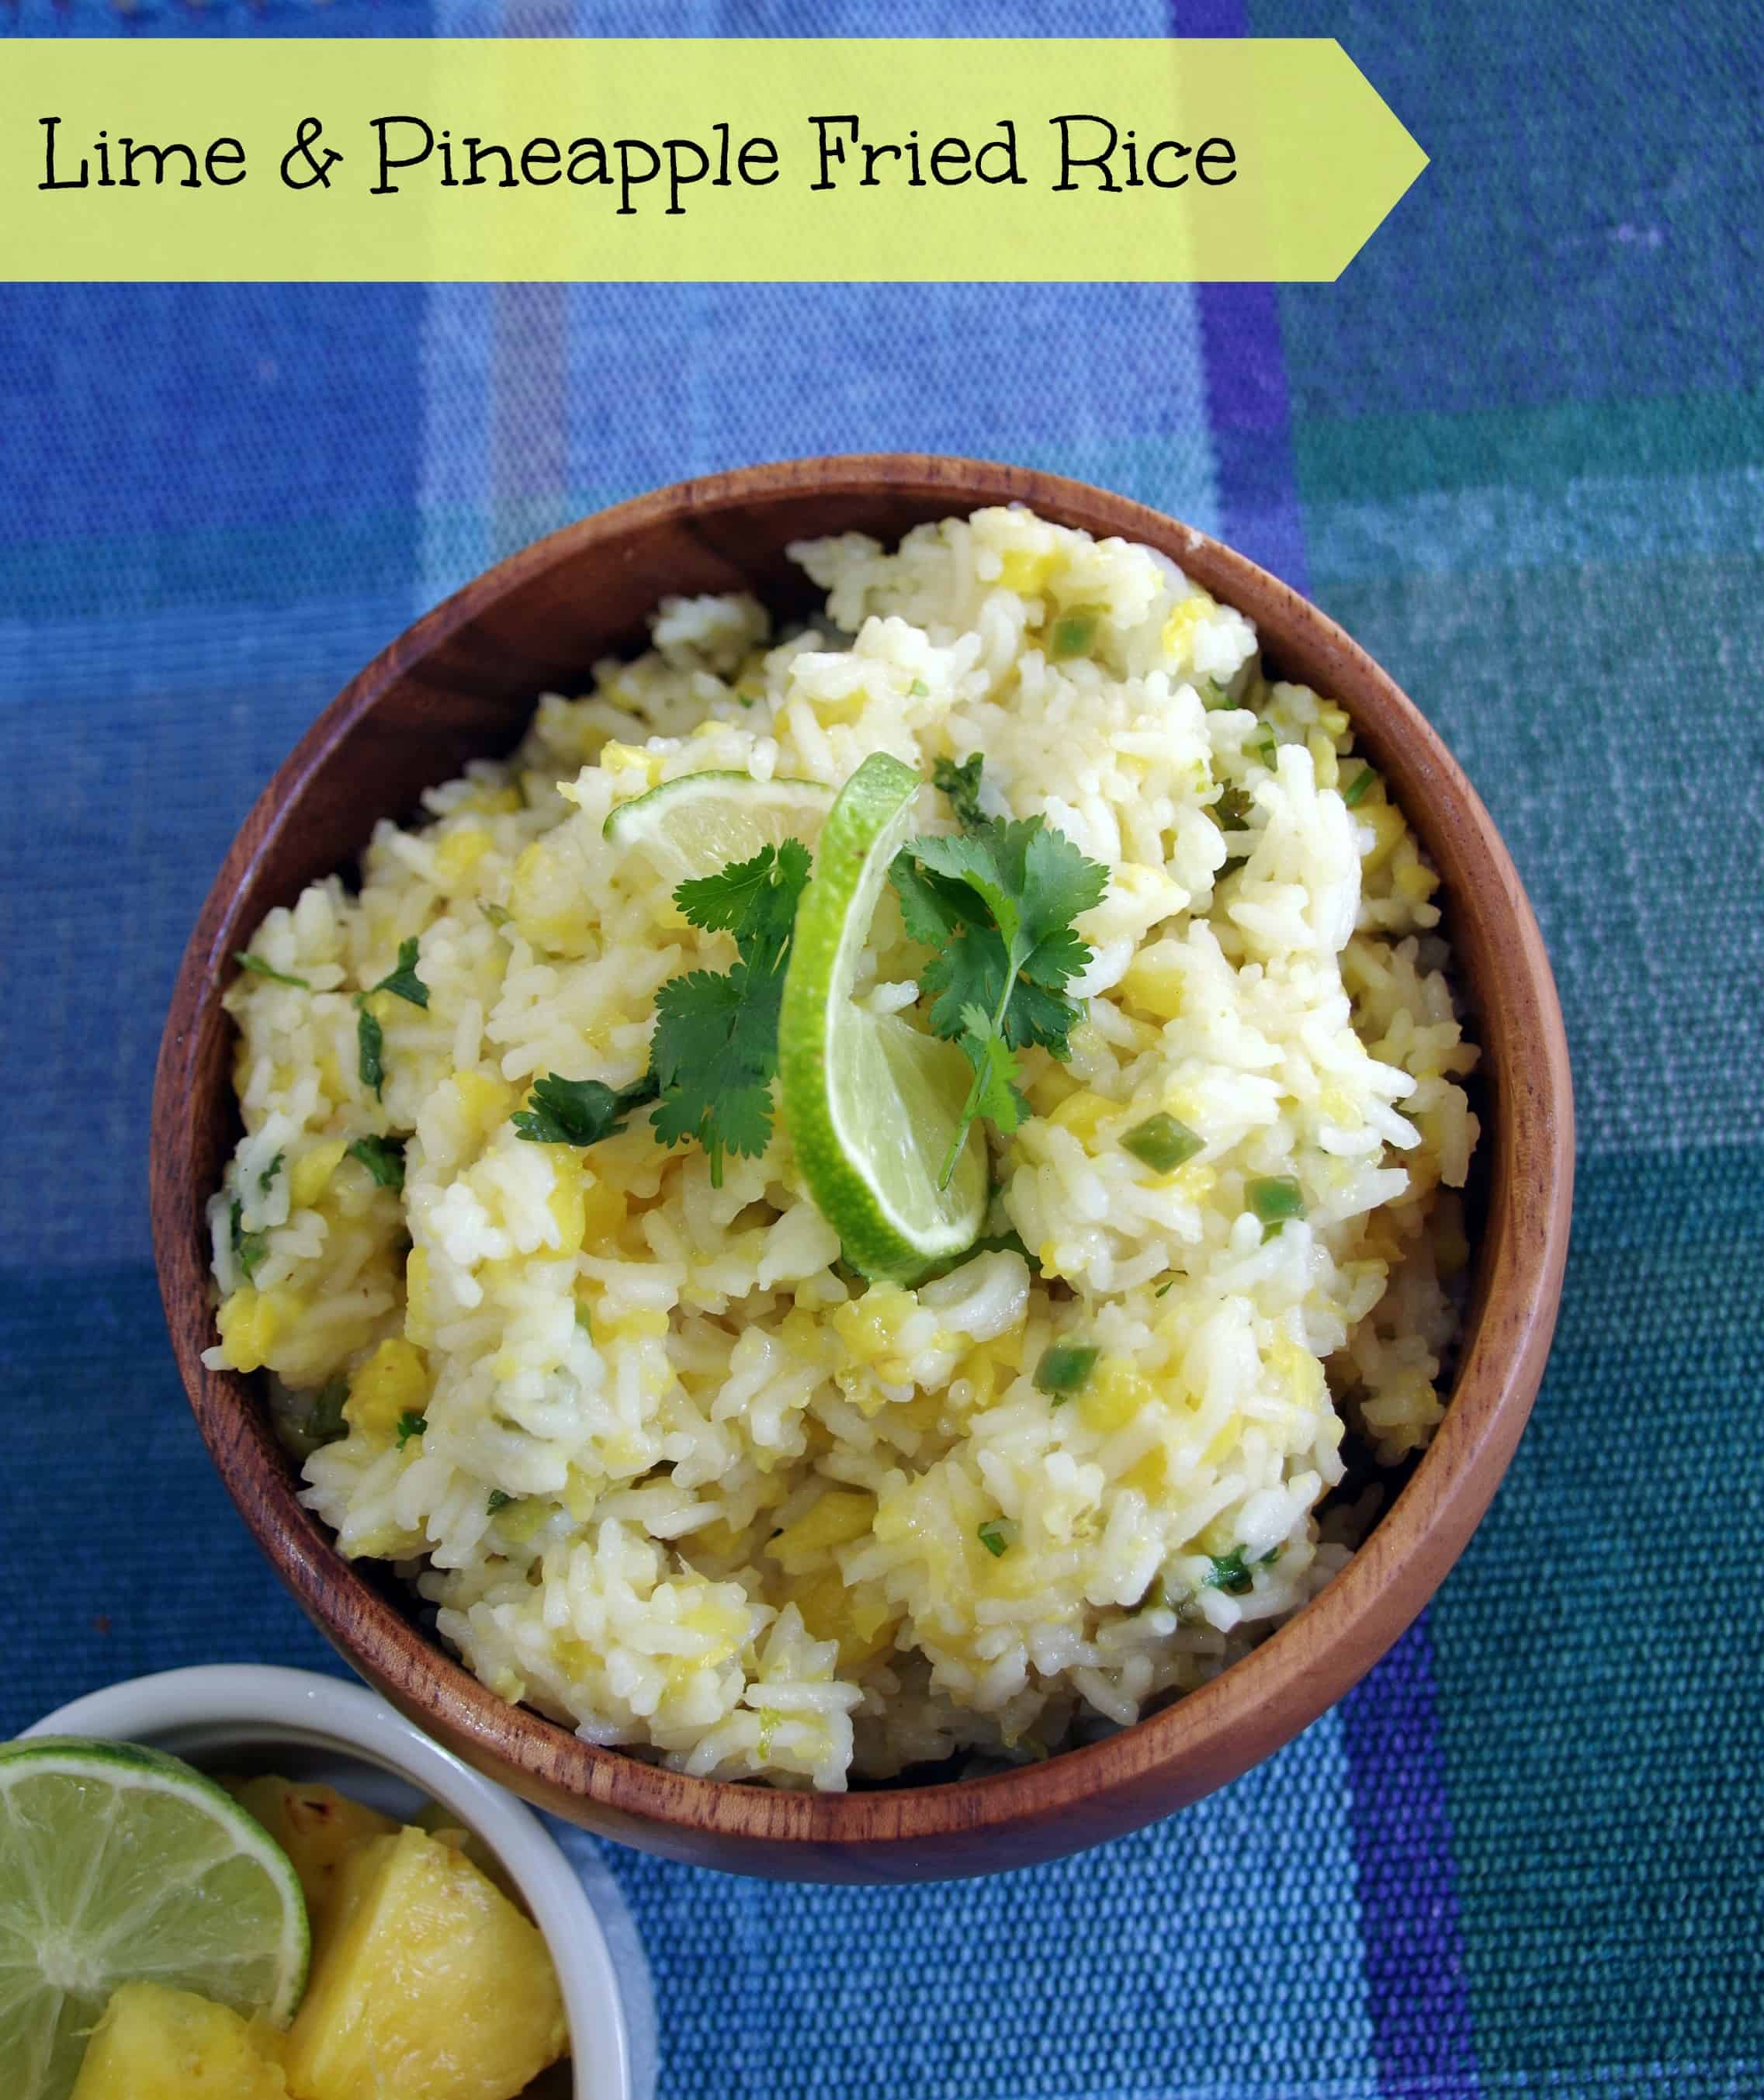 Lime and pineapple fried rice